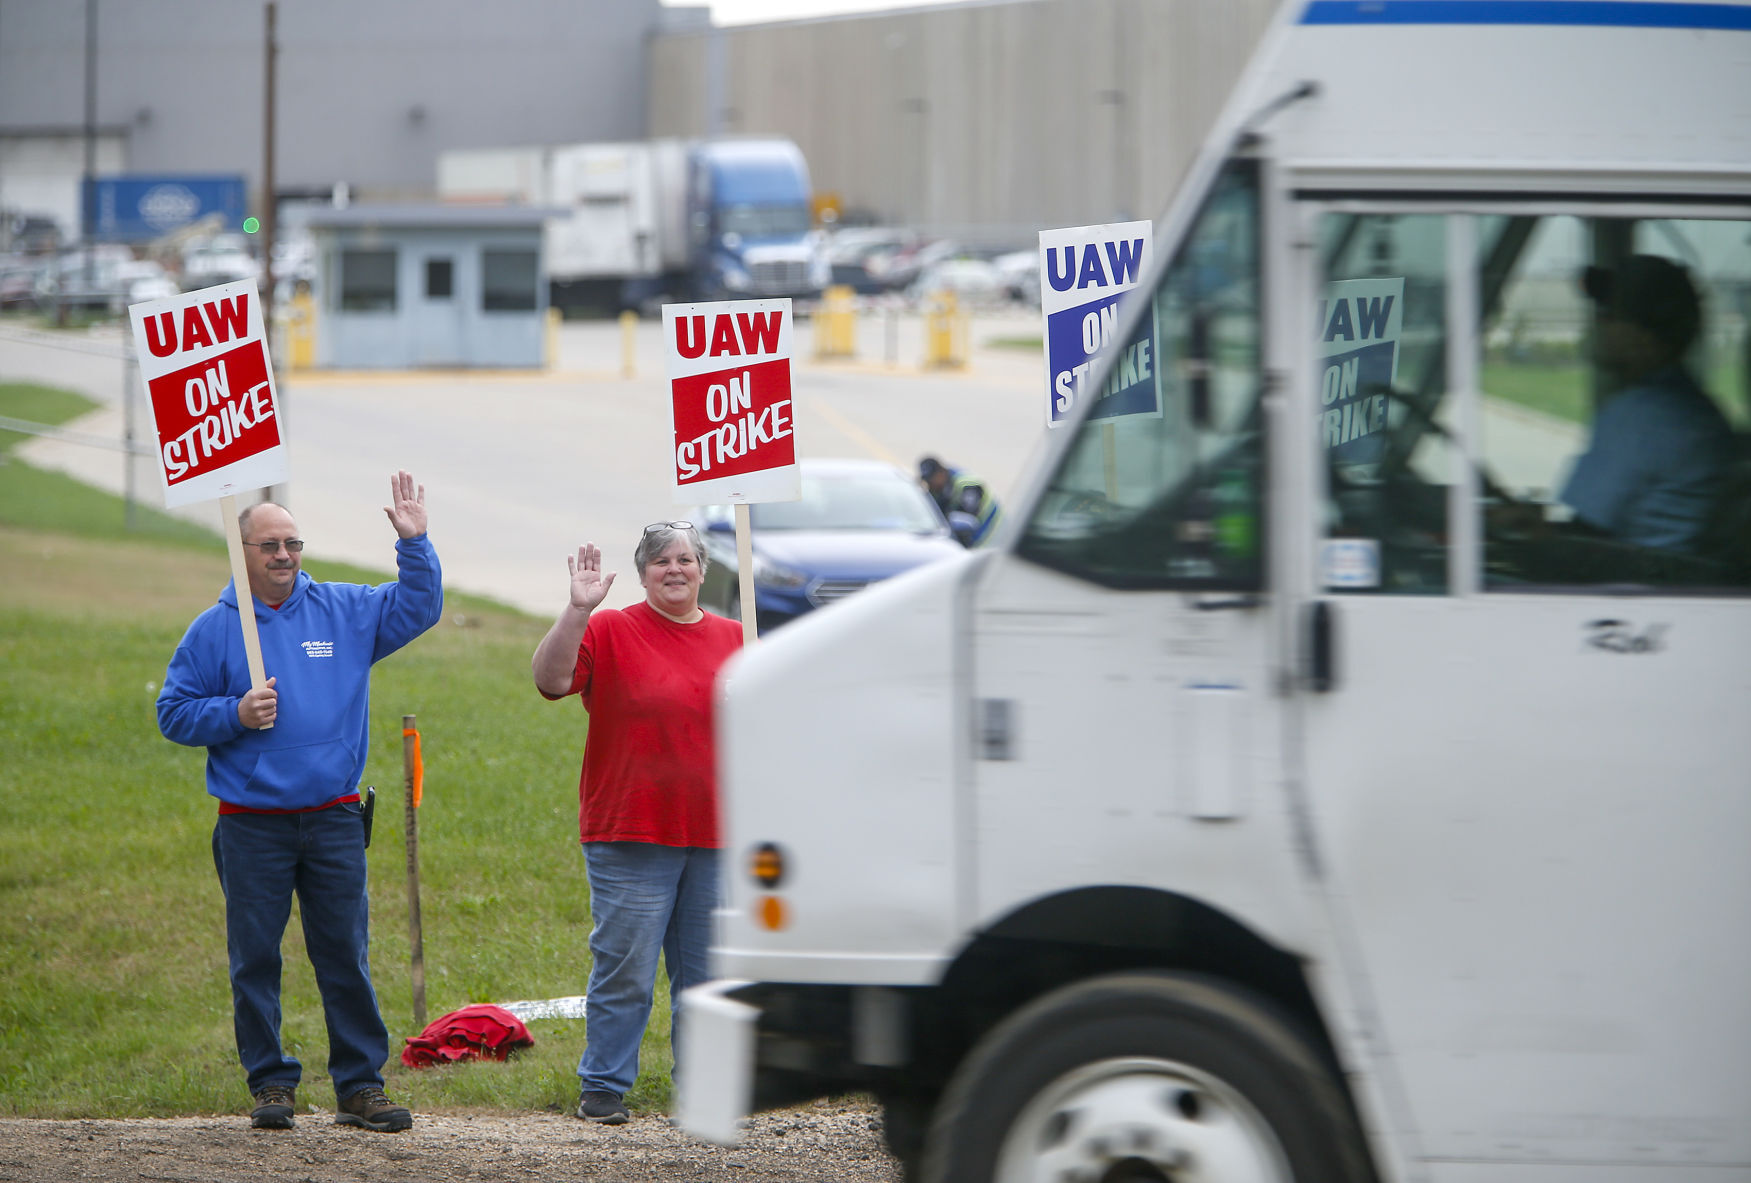 John Deere Dubuque Works union employees (from left) Rick Heid and Sheila Stirm picket outside the south entrance to the plant on Thursday, Oct. 14, 2021.    PHOTO CREDIT: Dave Kettering